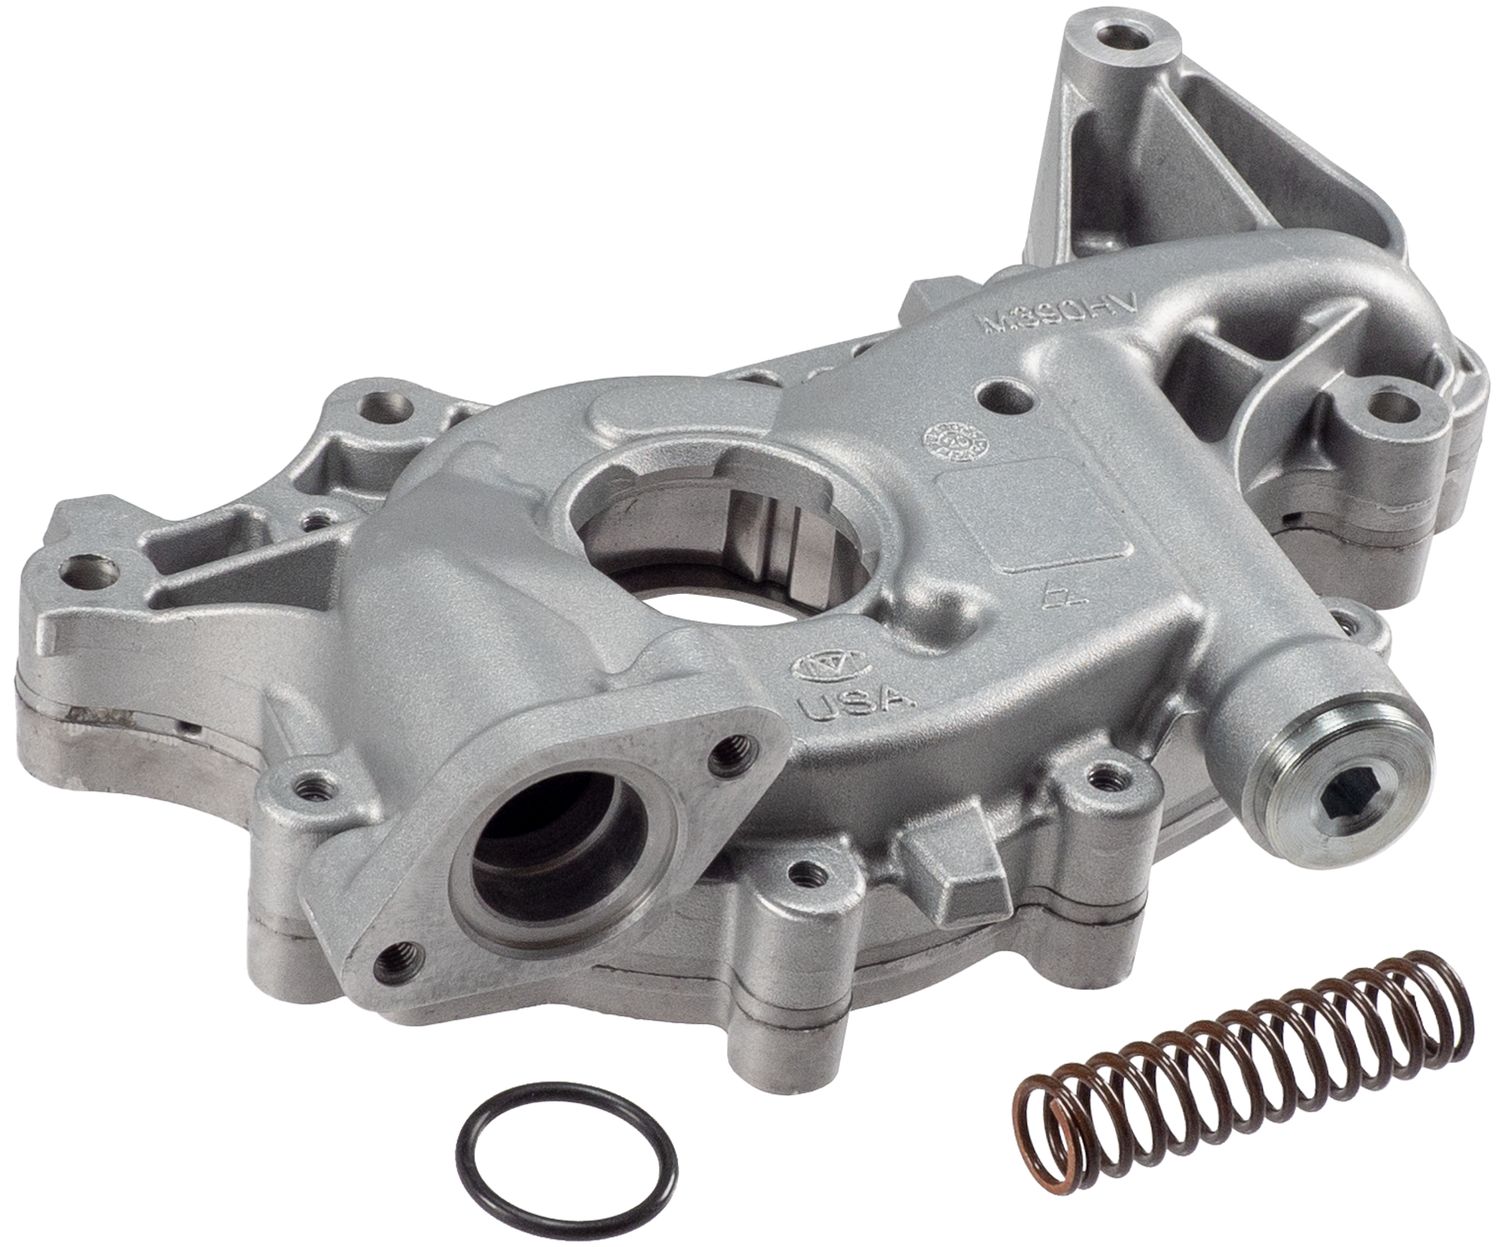 Melling M390HV Hi Volume Oil Pump 3.5 3.7 fits Various F150 Edge Explorer Expedition Fusion and others Fits select: 2011-2019 FORD EXPLORER, 2011-2017 FORD F150 - image 3 of 4